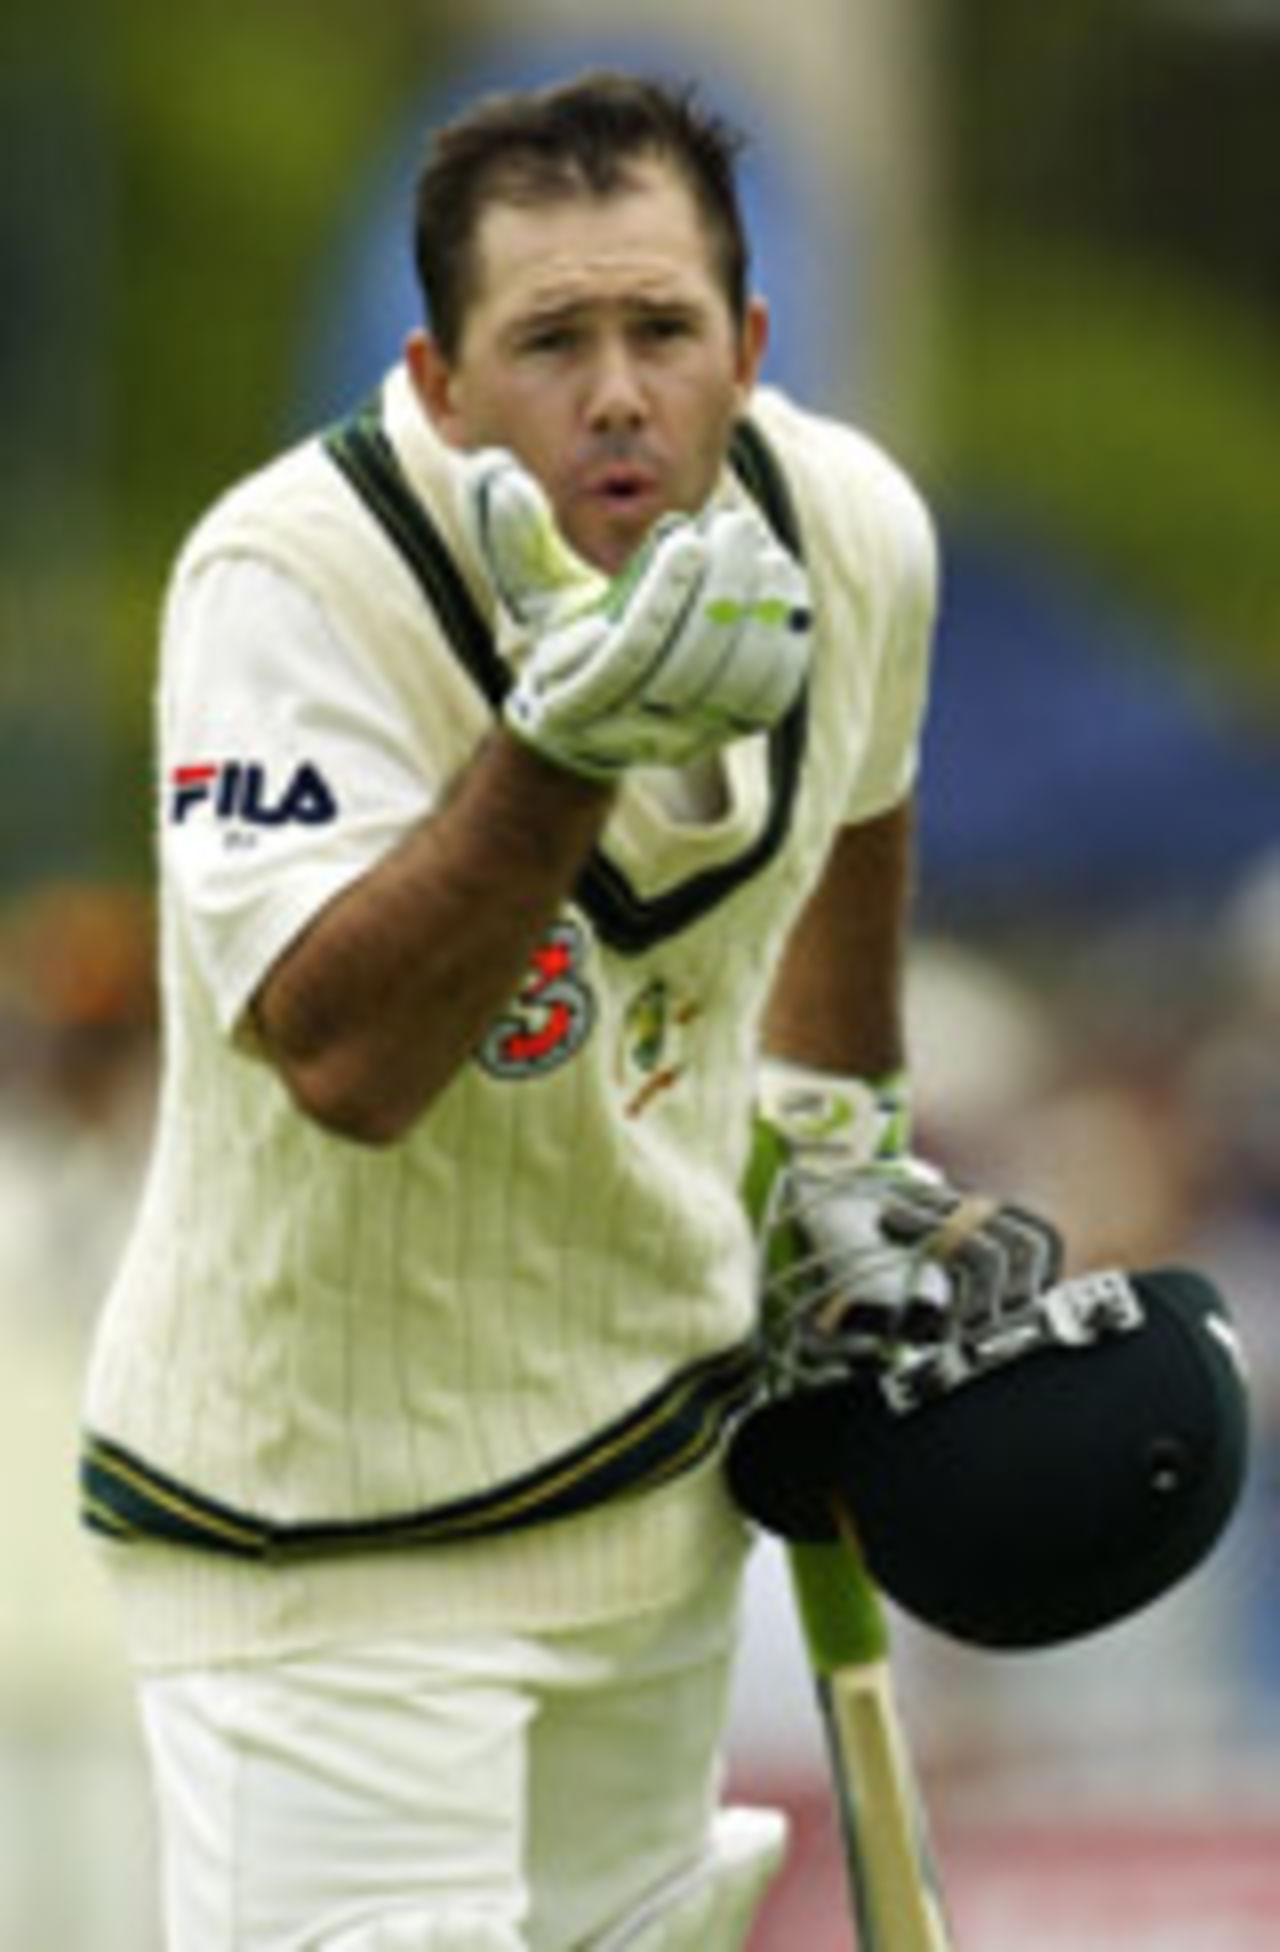 Ponting blows his wife a kiss after scoring a double-hundred, Australia v India, 2nd Test, Adelaide, 2nd day, December 13, 2003